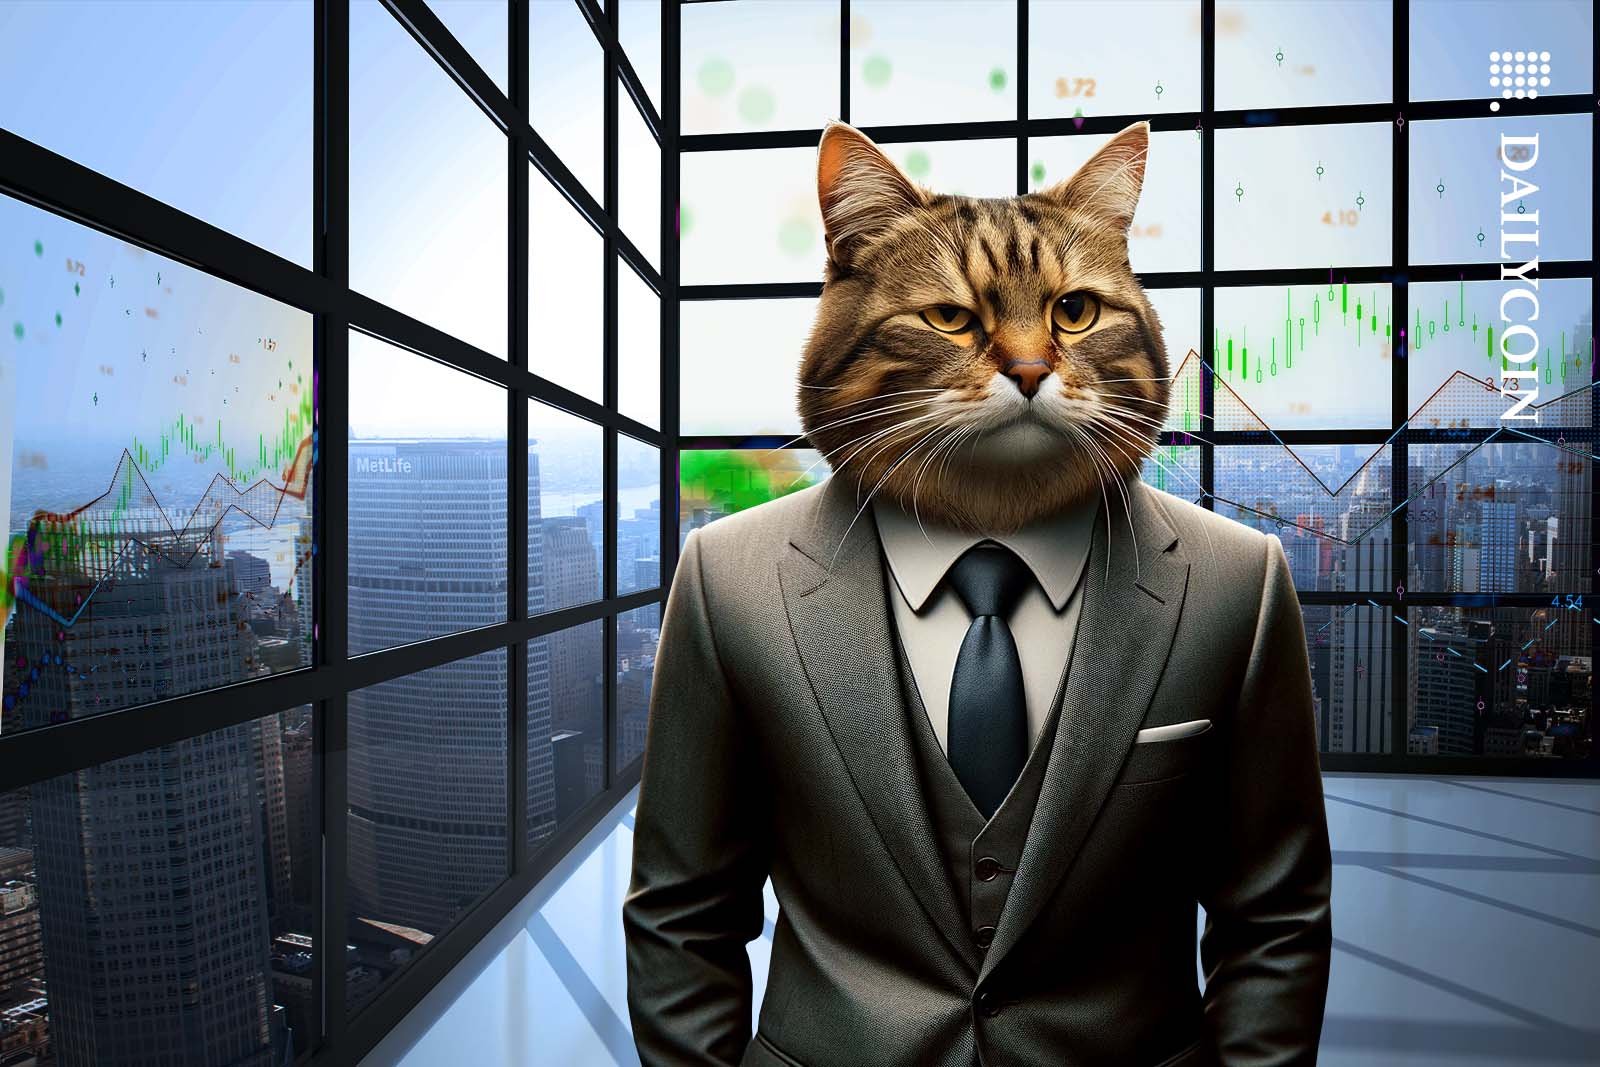 A business cat wearing a three piece suit contemplating in his office.